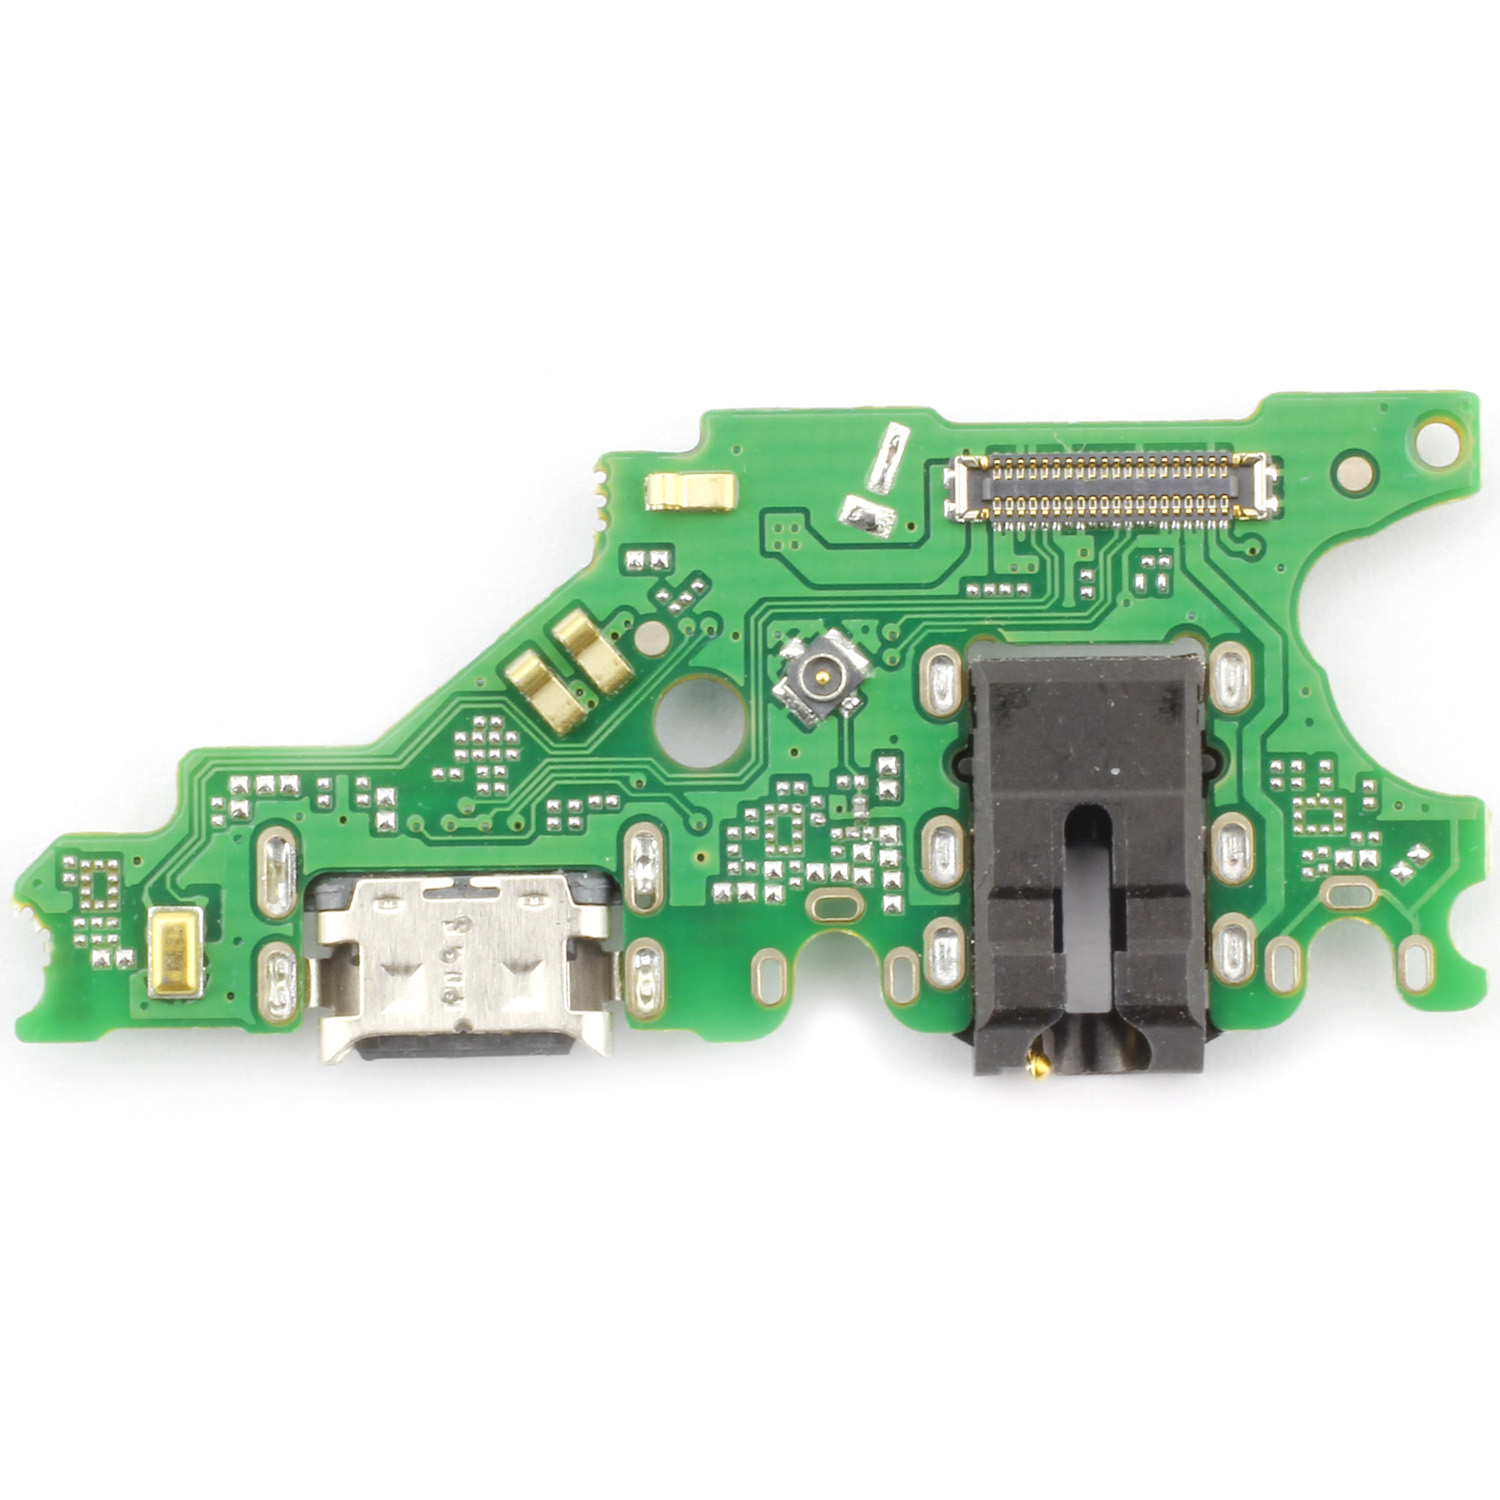 Dock Connector with Audio Port Compatible with Huawei Mate 20 lite (SNE-AL00, SNE-LX1)